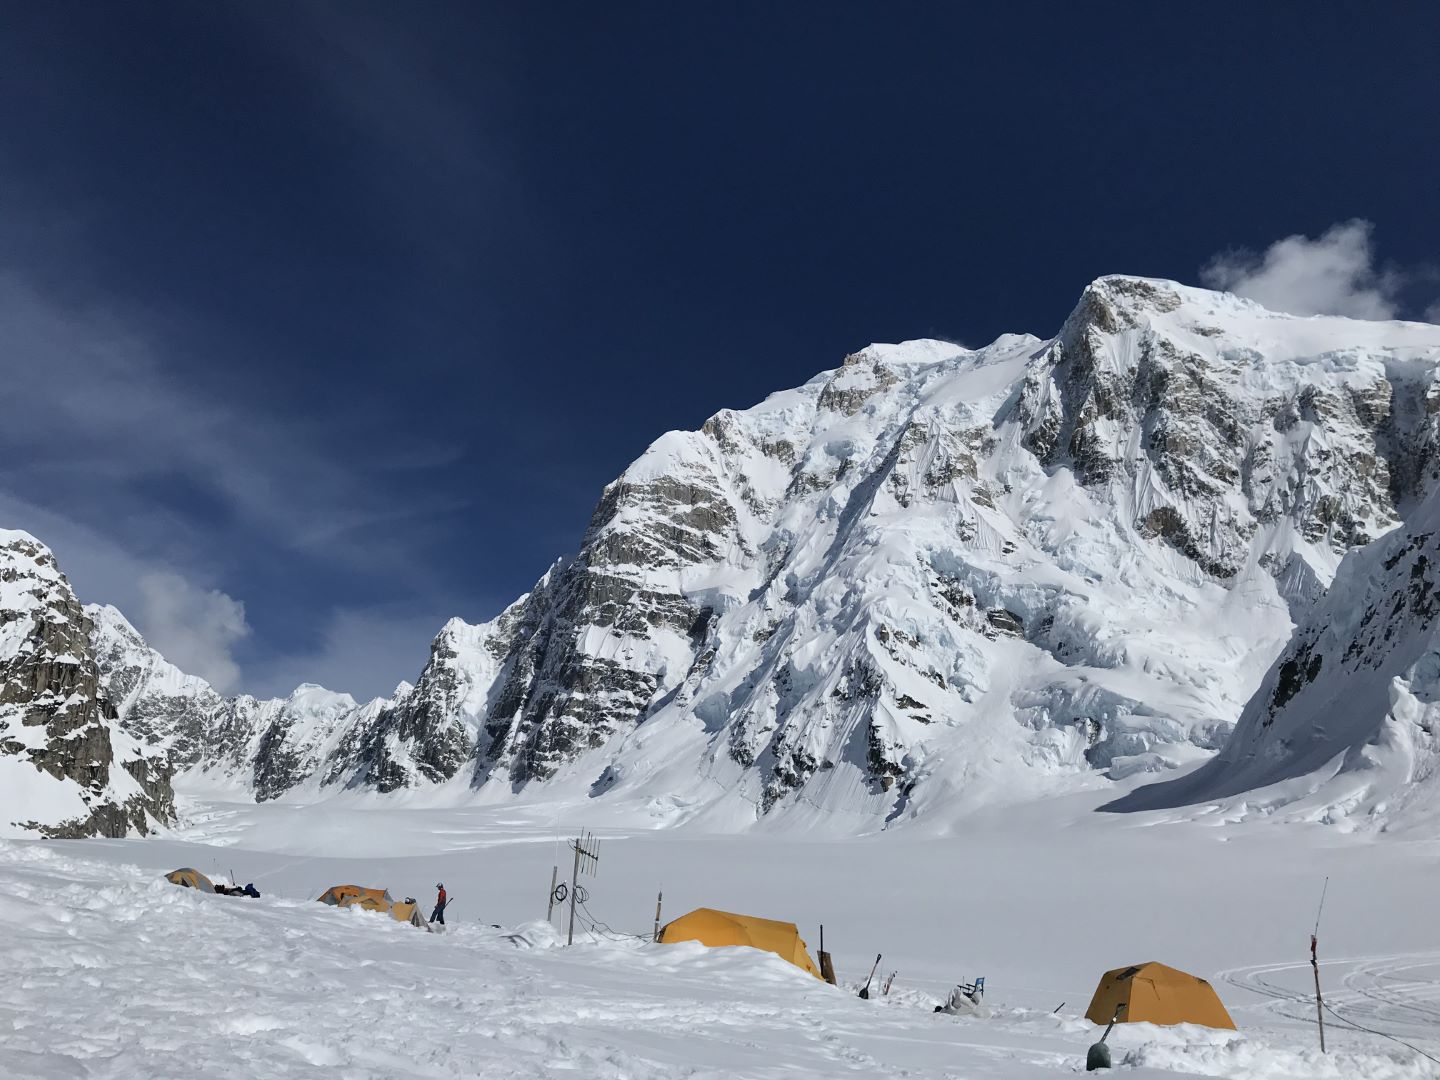 Mount Hunter and some airstrip tents